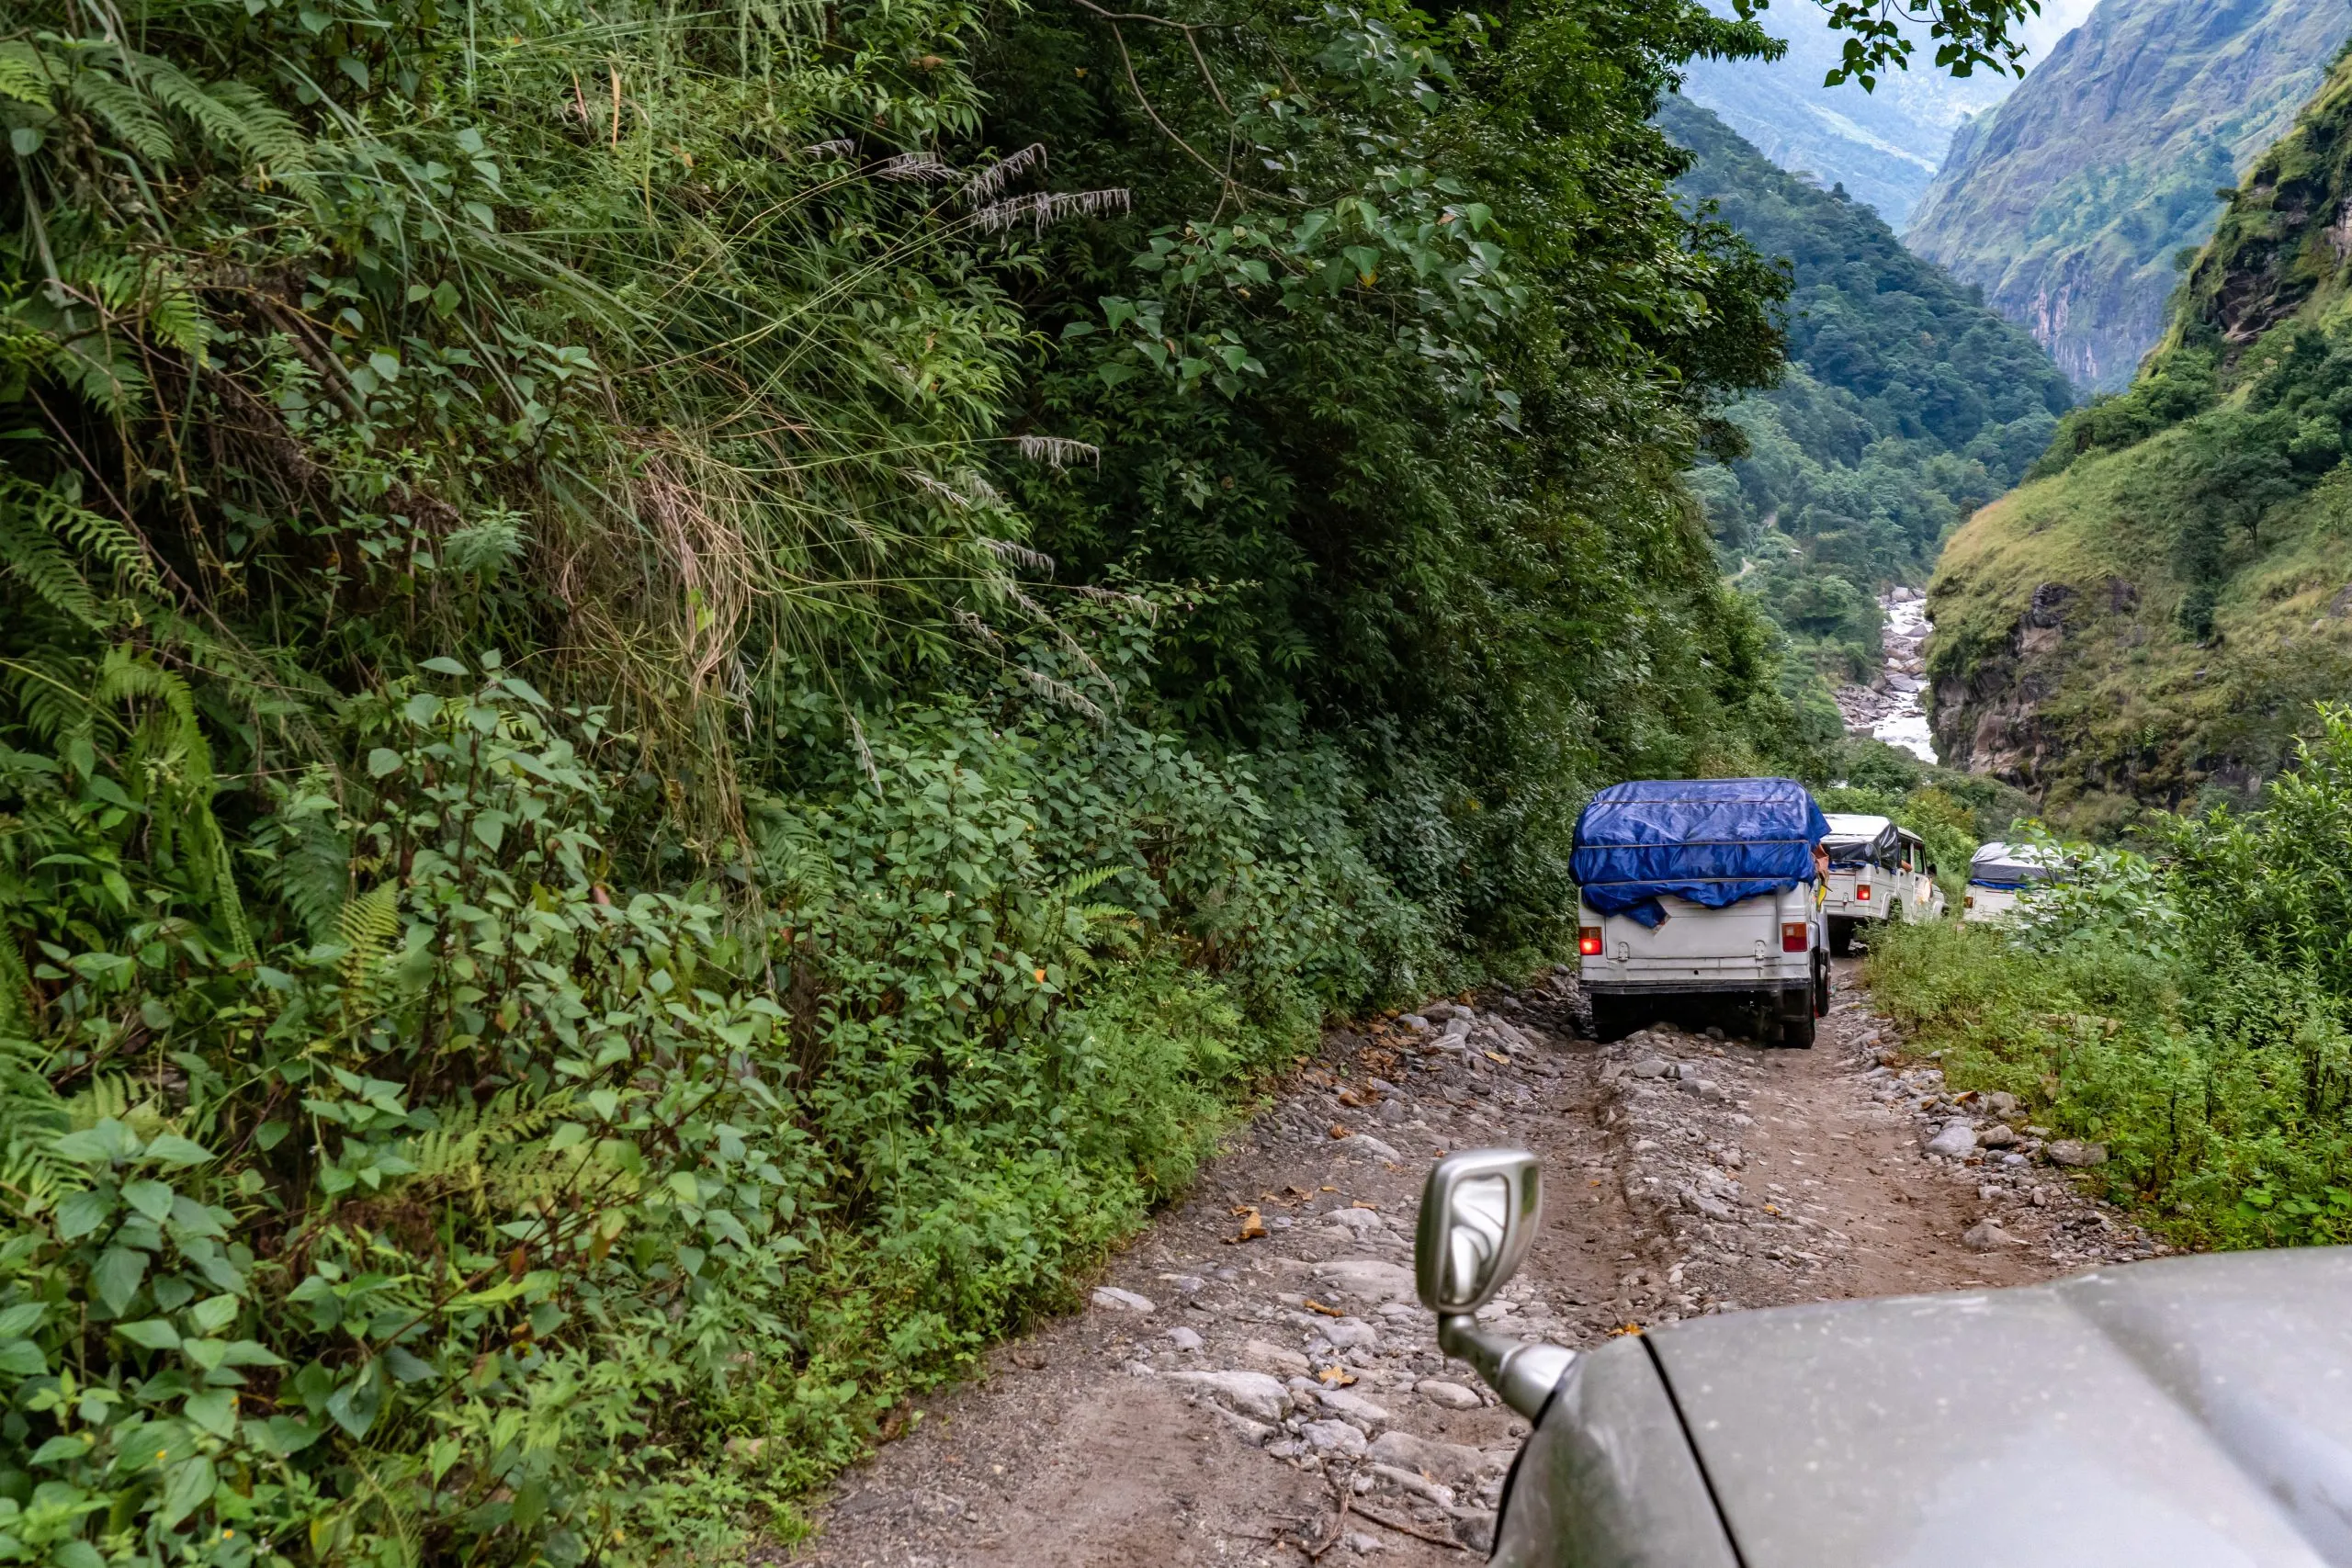 A column of 4wd vehicles carrying loads descending a dirt and rock path into a deep canyon lined with a river, Manang Road, Nepal